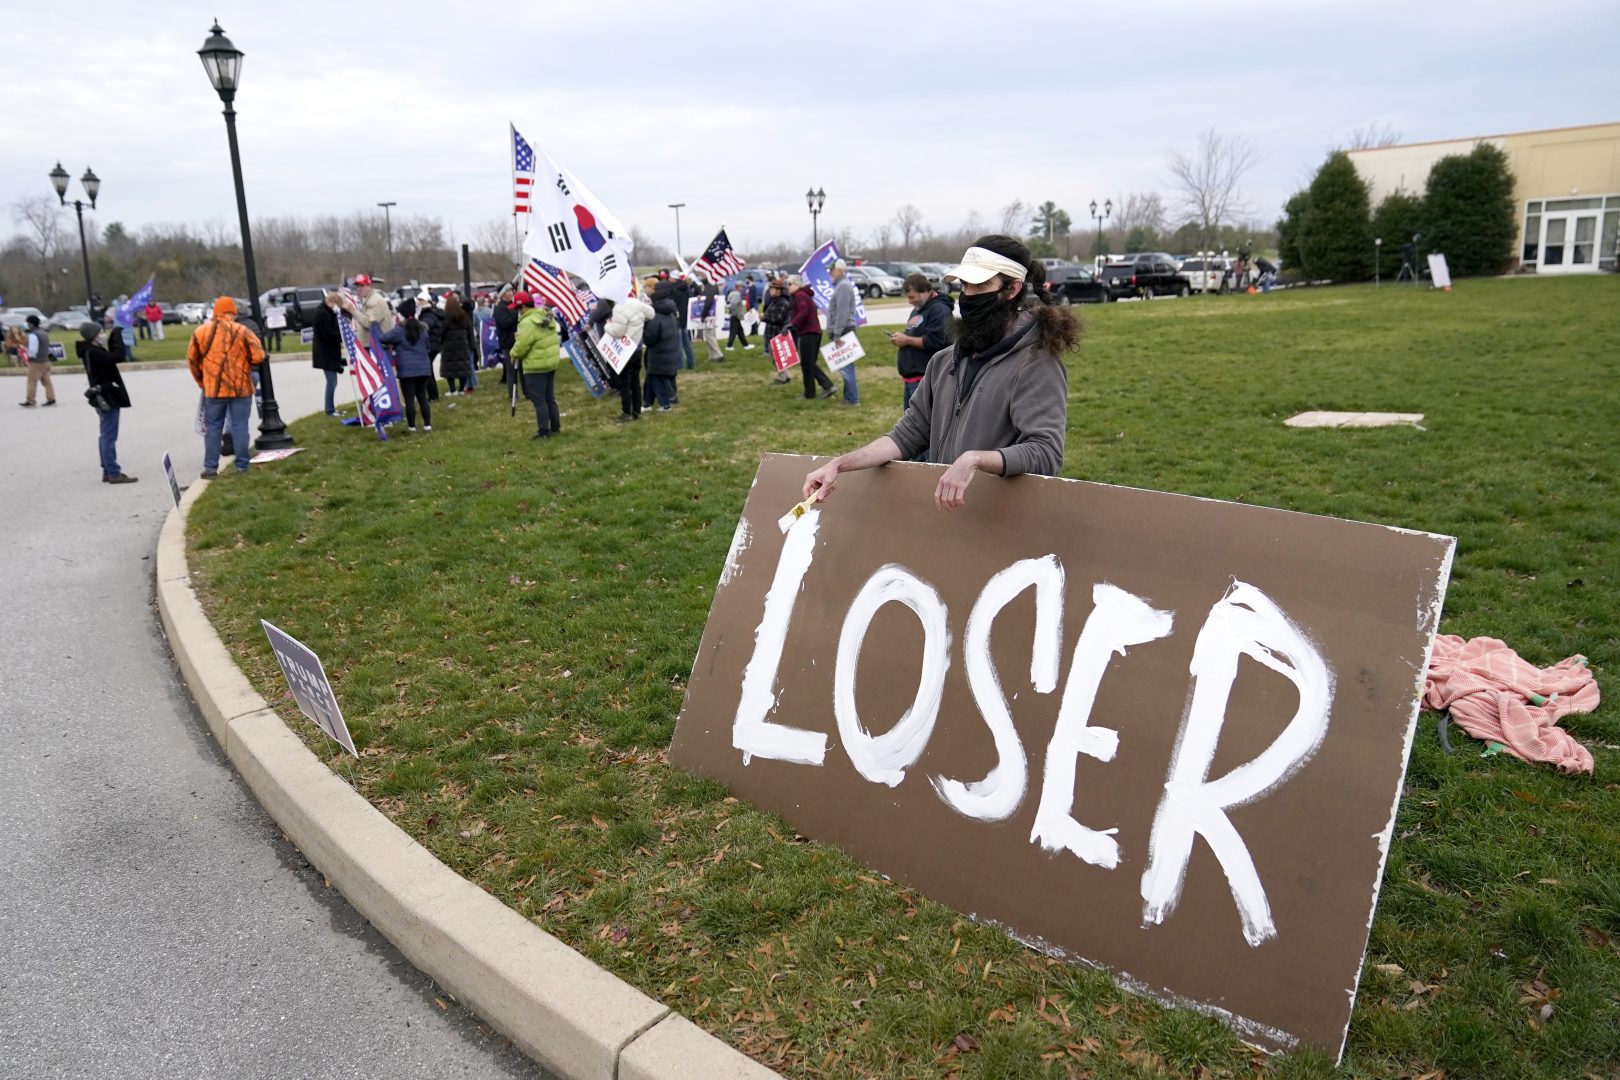 Supporters of President Donald Trump, left, gather as a counter protester holds a sign outside of the Wyndham Hotel where the Pennsylvania State Senate Majority Policy Committee is scheduled to meet, Wednesday, Nov. 25, 2020, in Gettysburg, Pa.